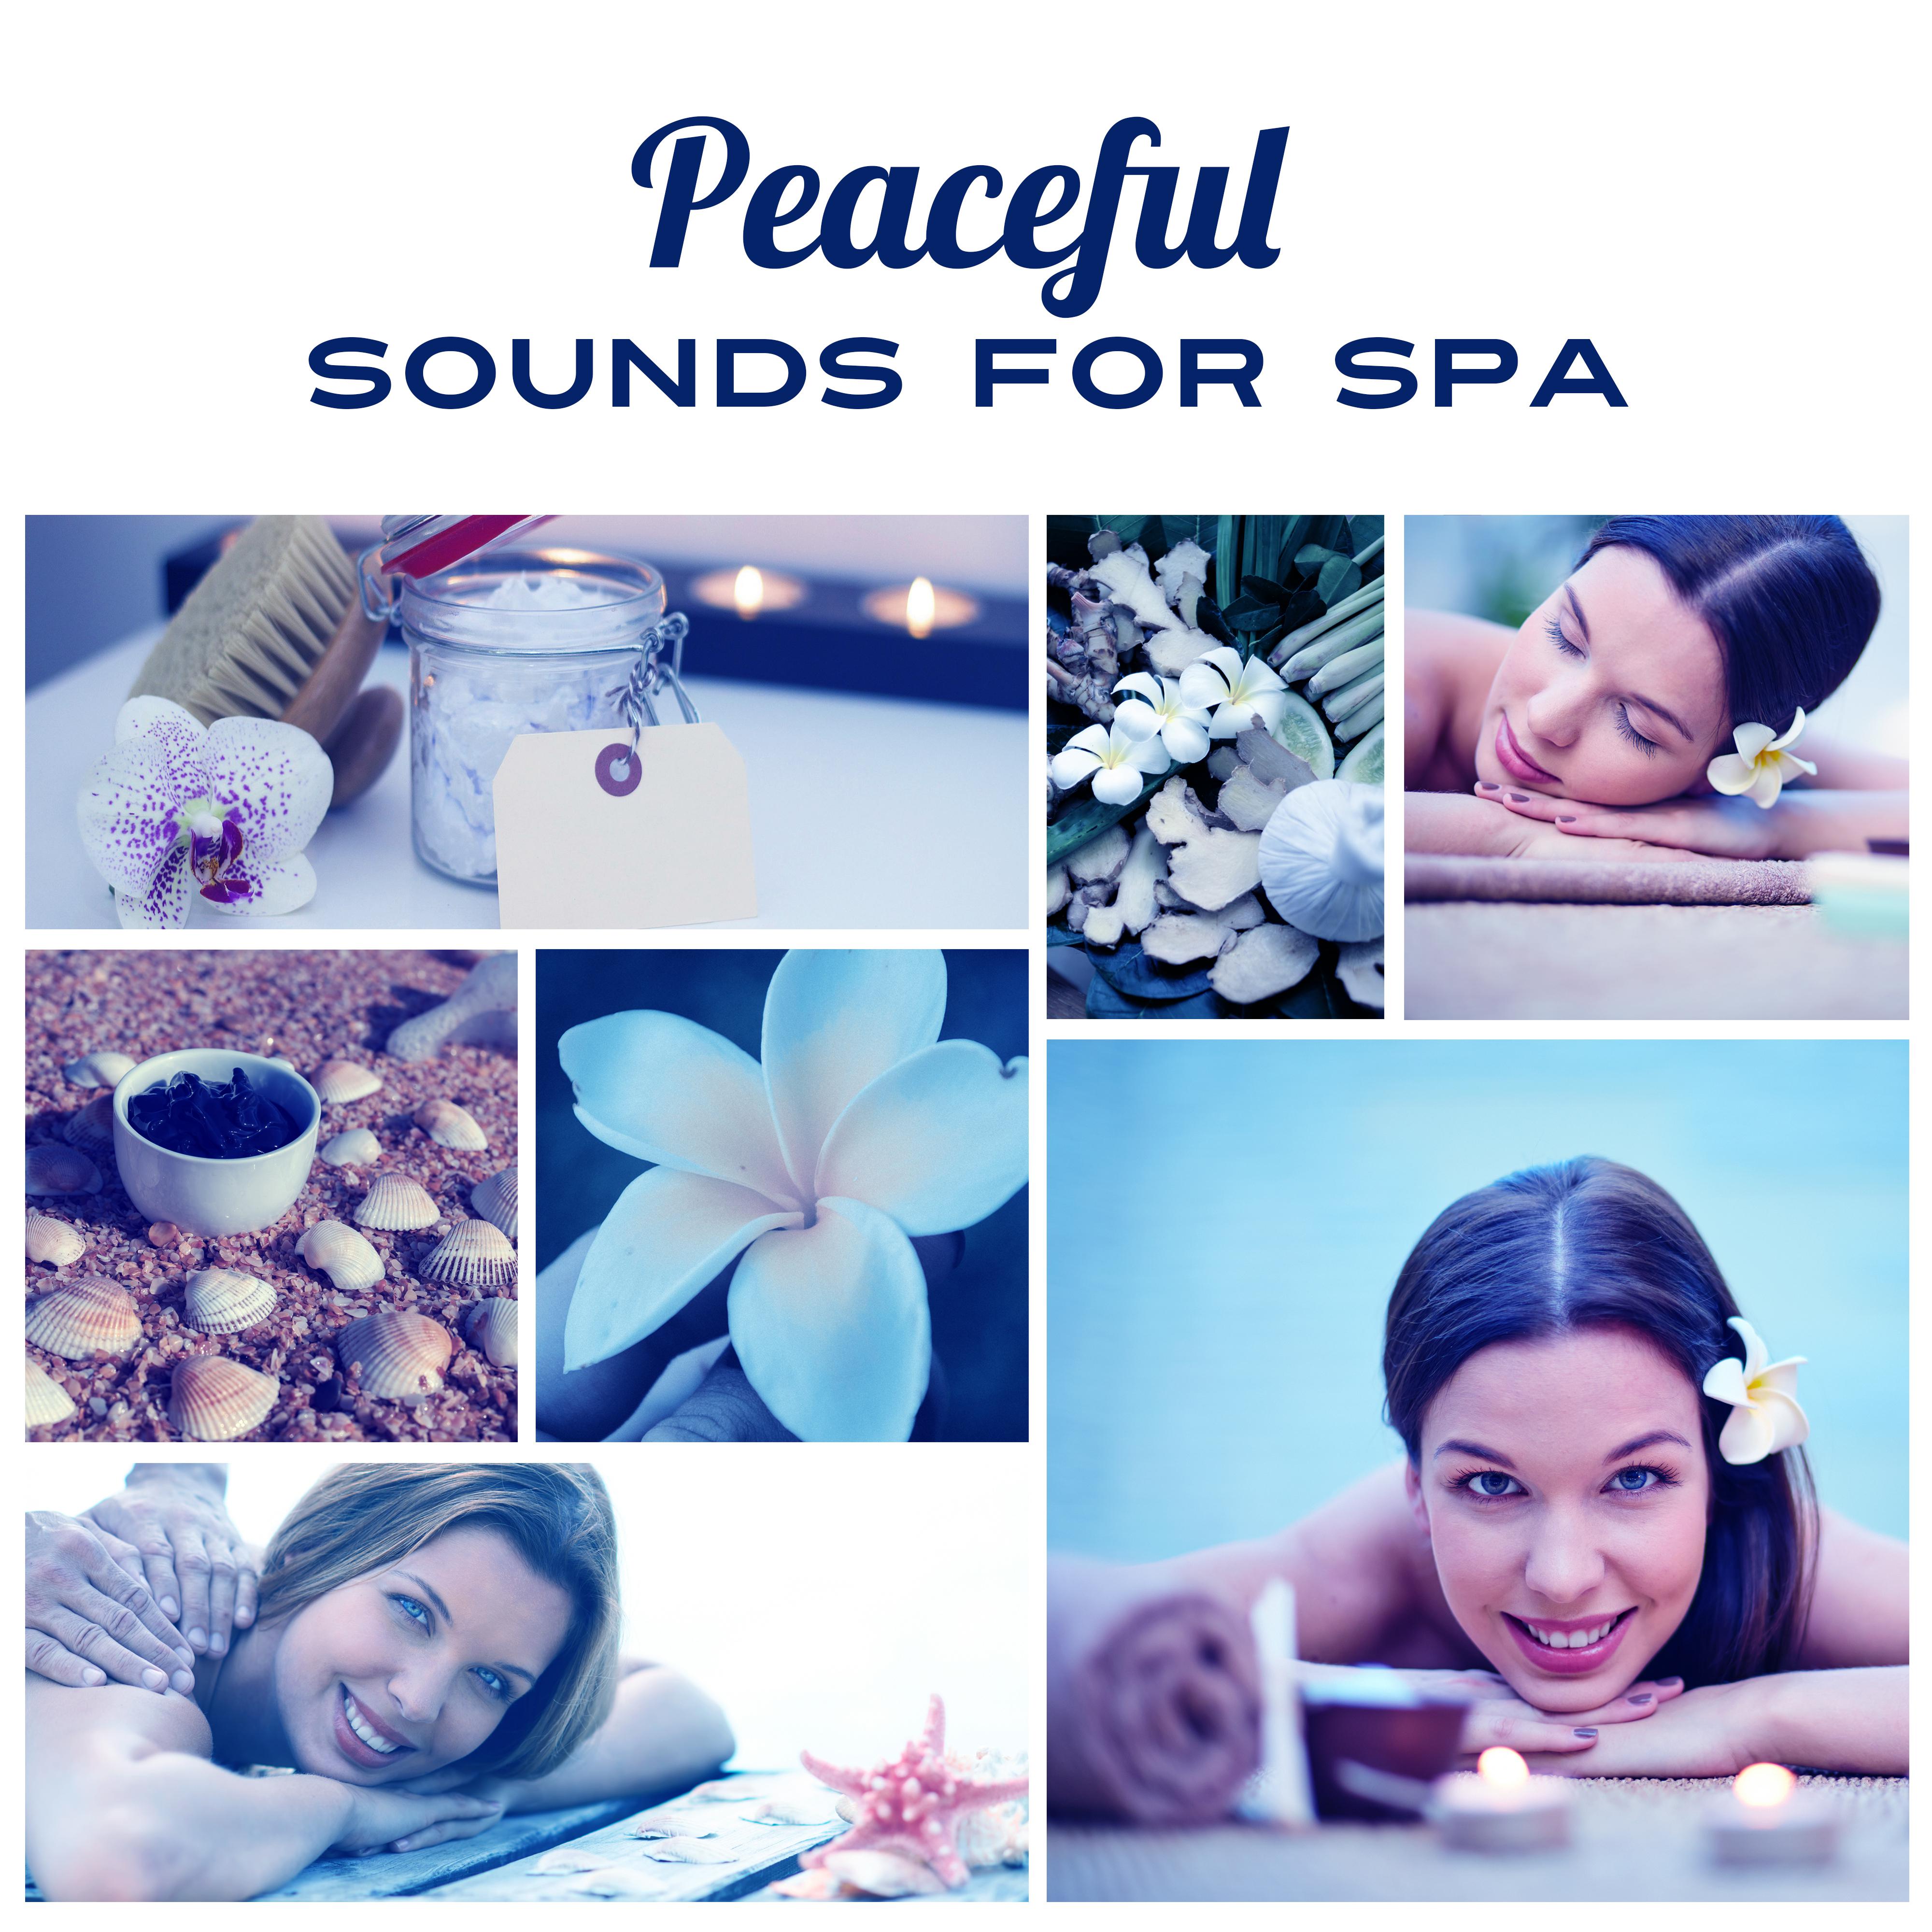 Peaceful Sounds for Spa – Soft Music, Relaxation Wellness, Meditation Spa, Soothing Water, Nature Sounds for Rest, Deep Sleep